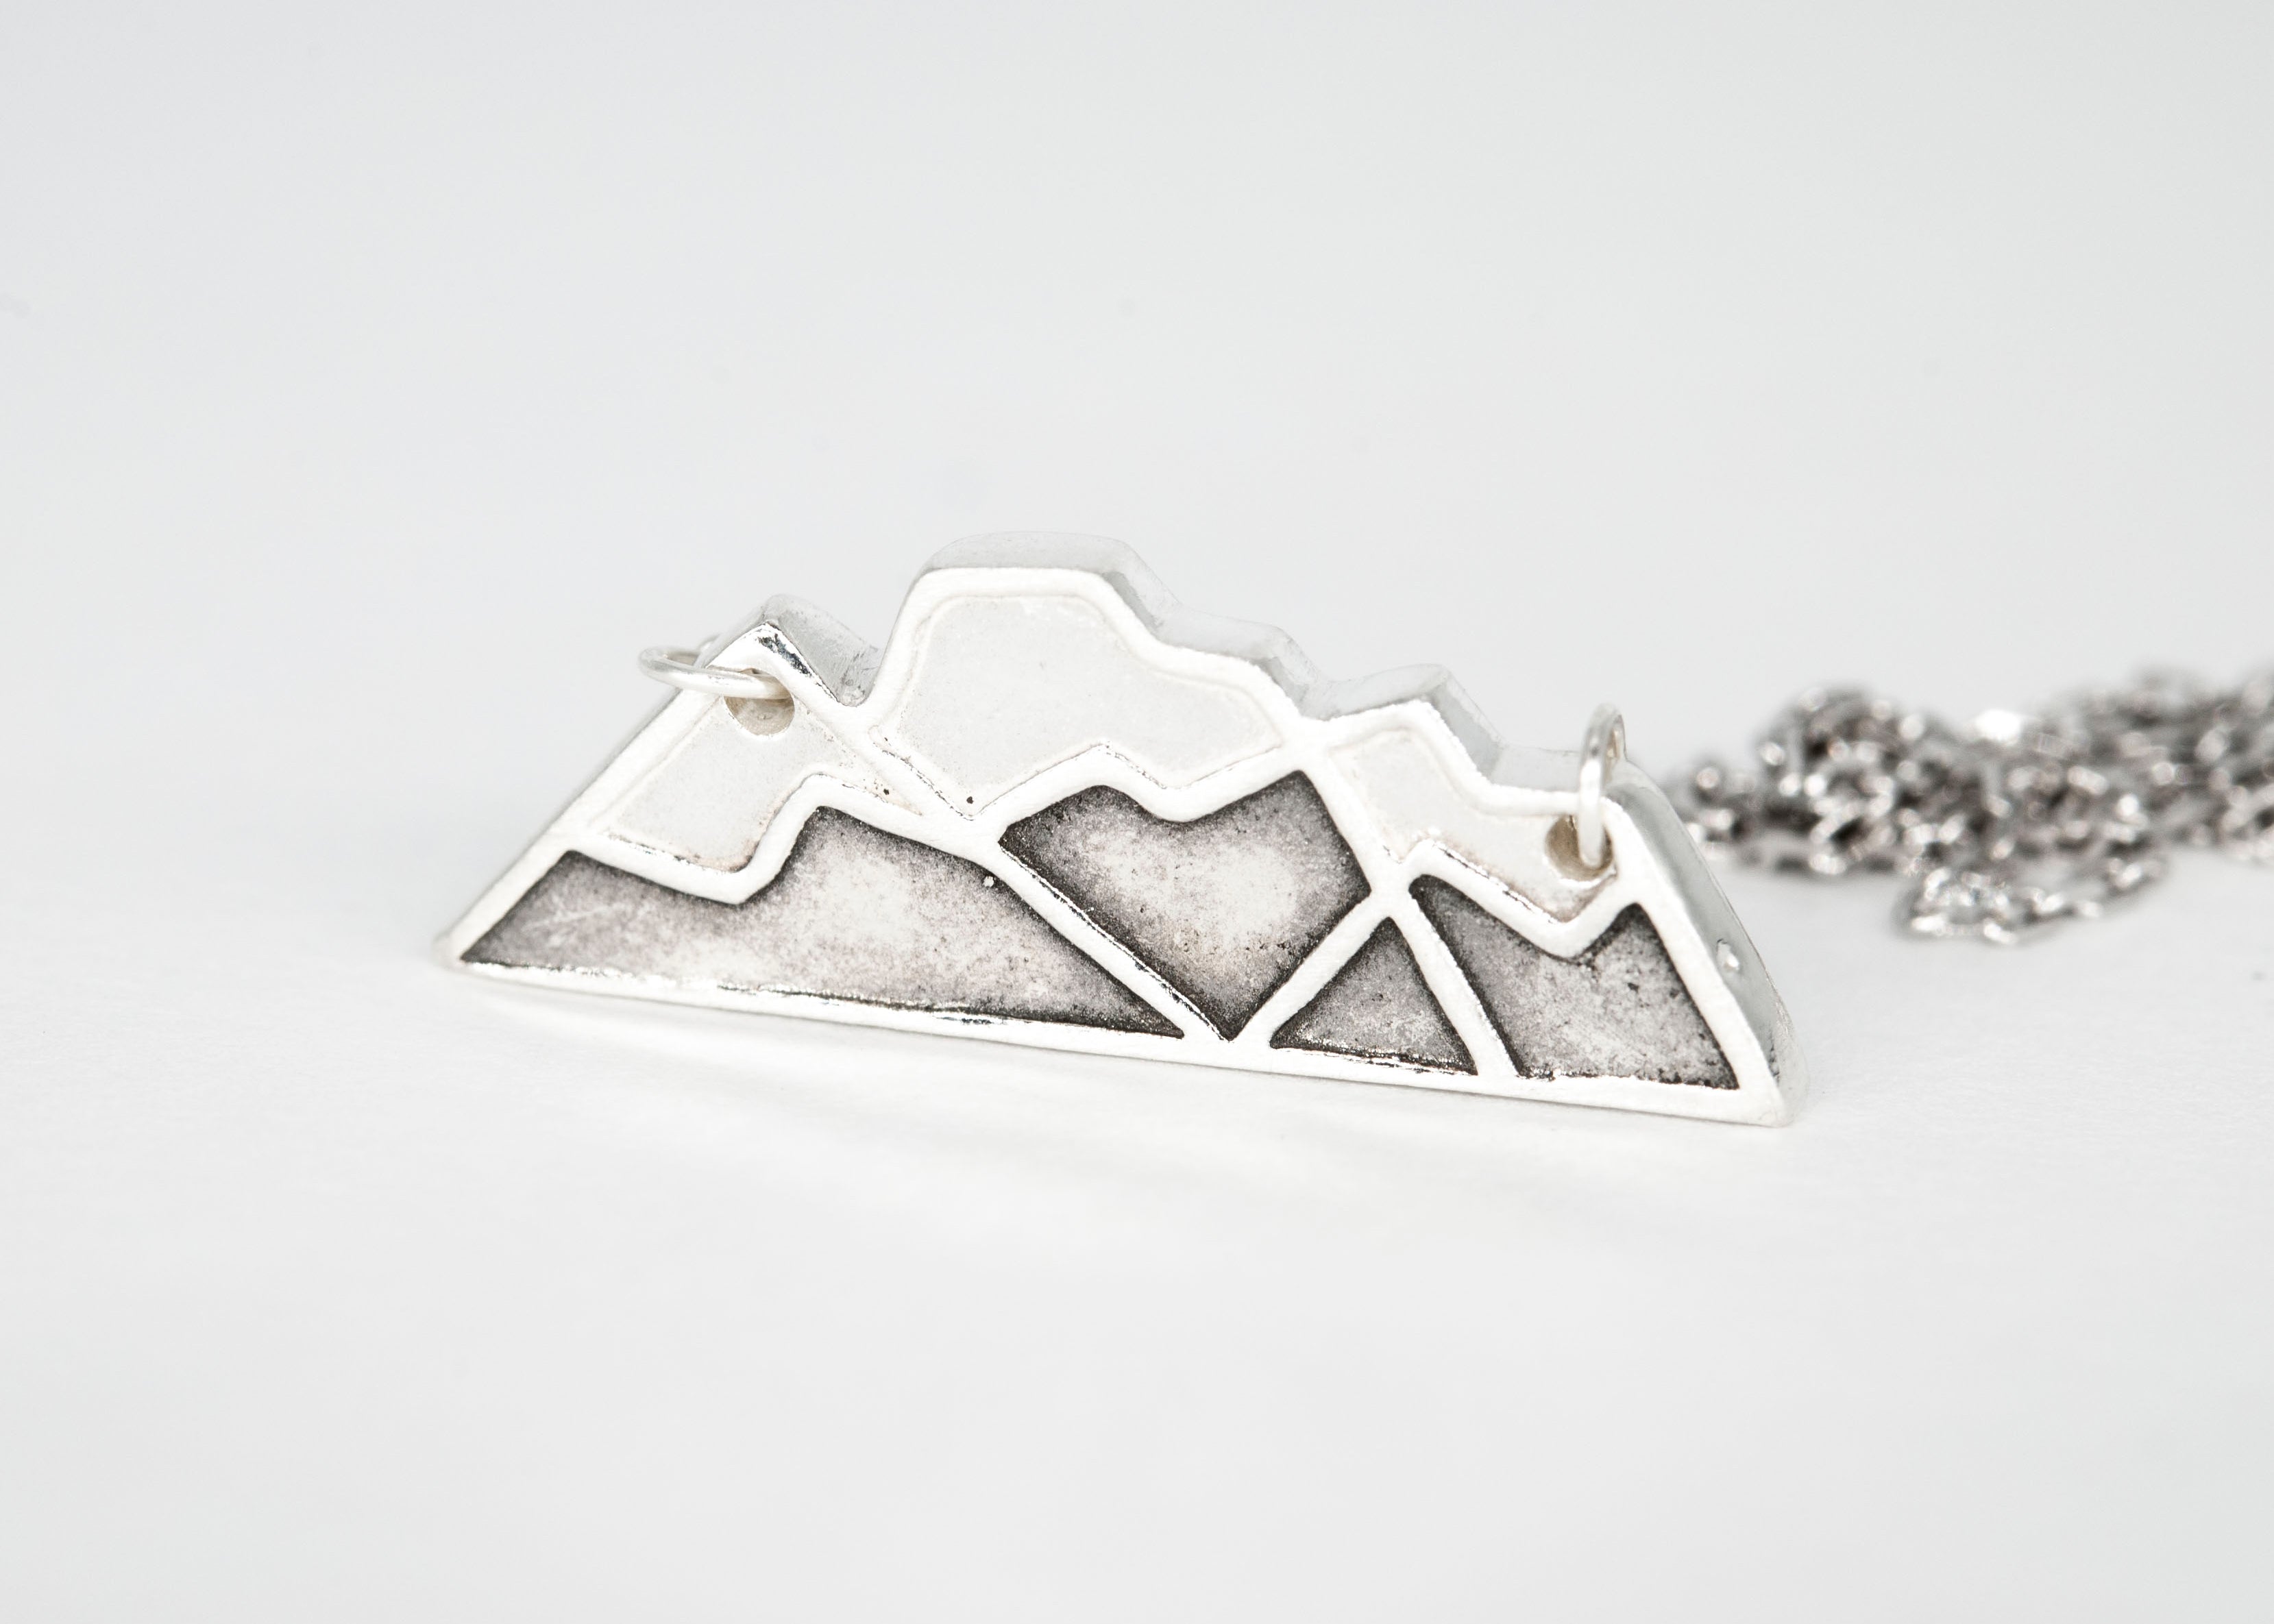 Three Sisters Fernie Mountain Necklace